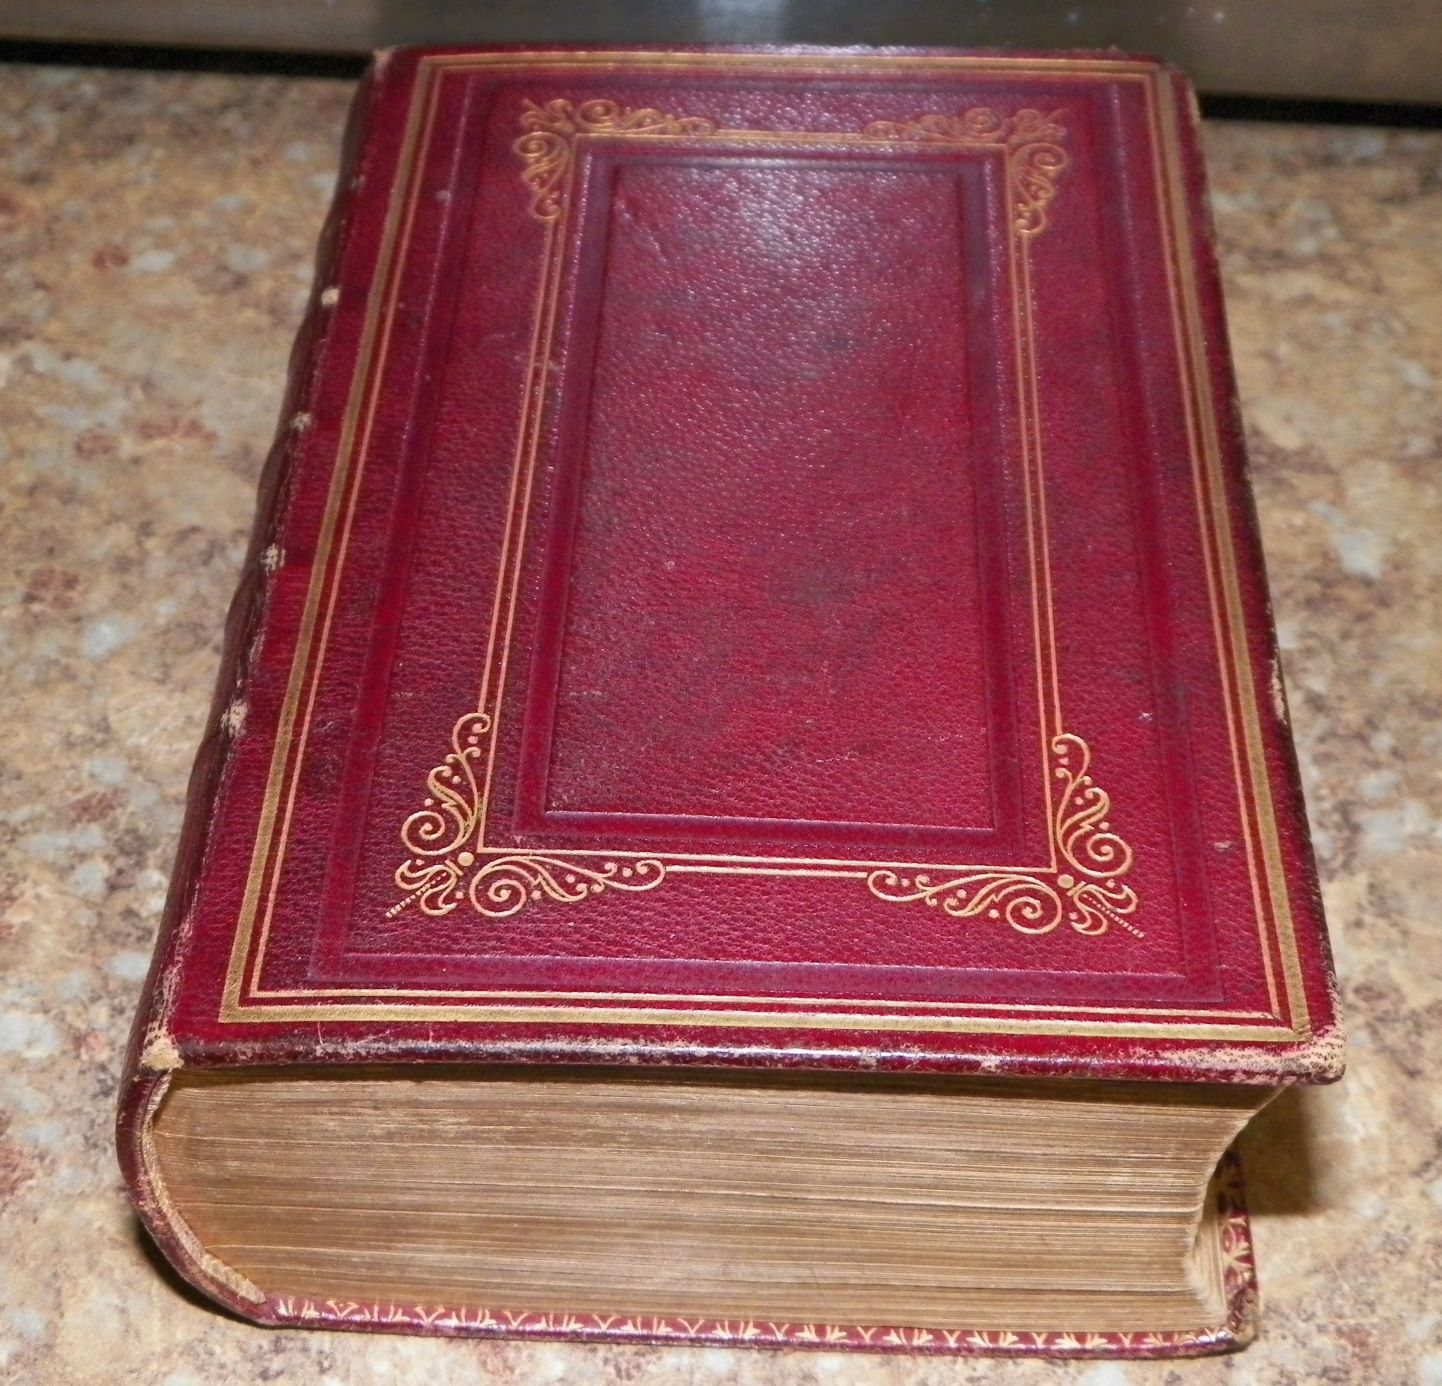 COLLECTIBLE BOOK BIBLES & TORAHS BIBLE BIG RED LEATHER COVER 2A_A.jpg